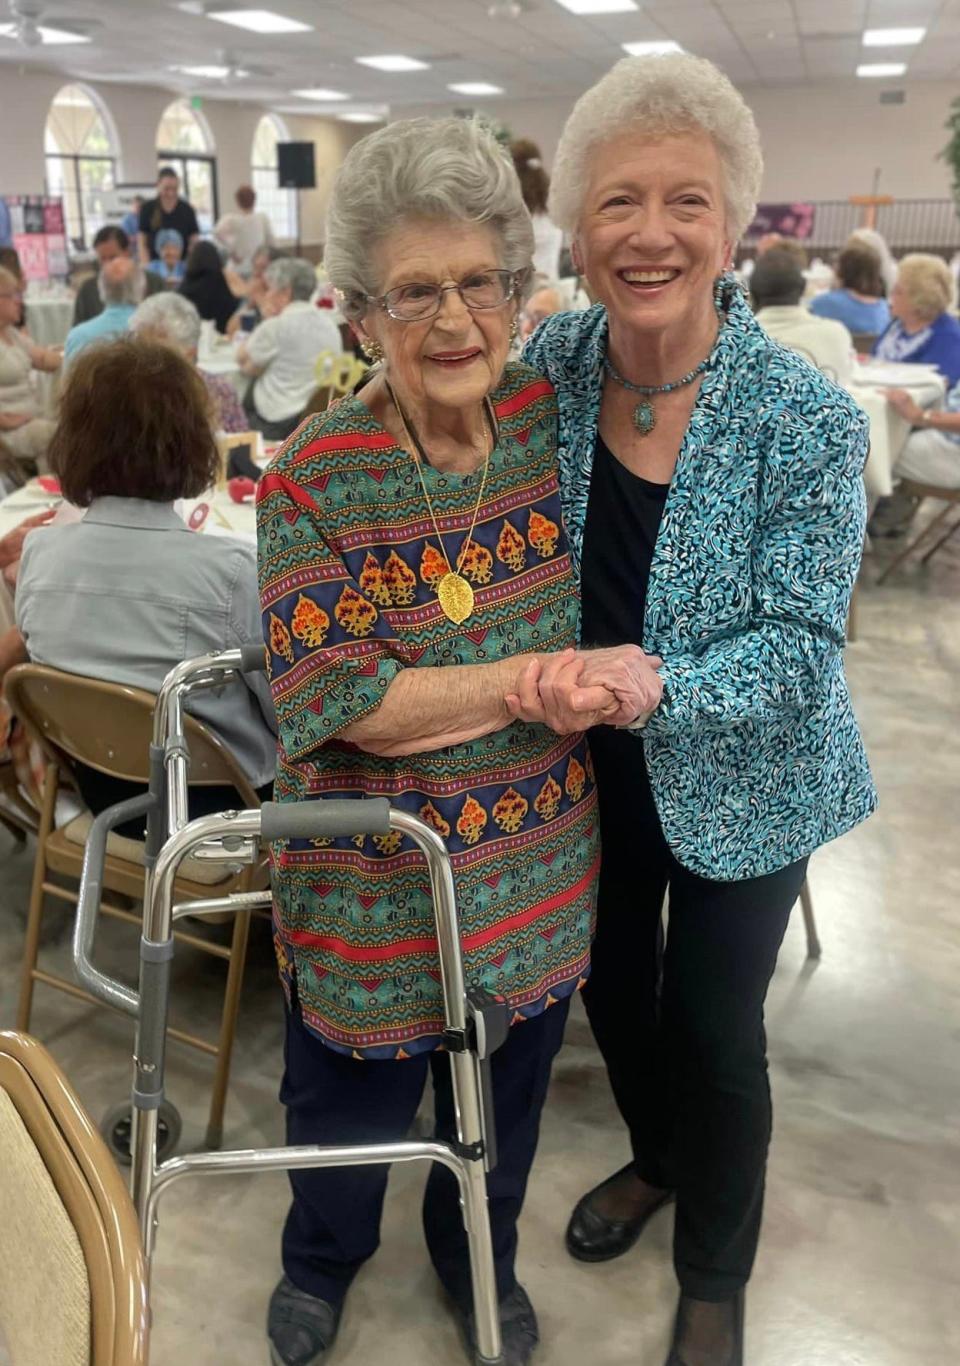 Retired school teacher June Edith Langer, left, of Apple Valley celebrates her 100th birthday with friends and family.